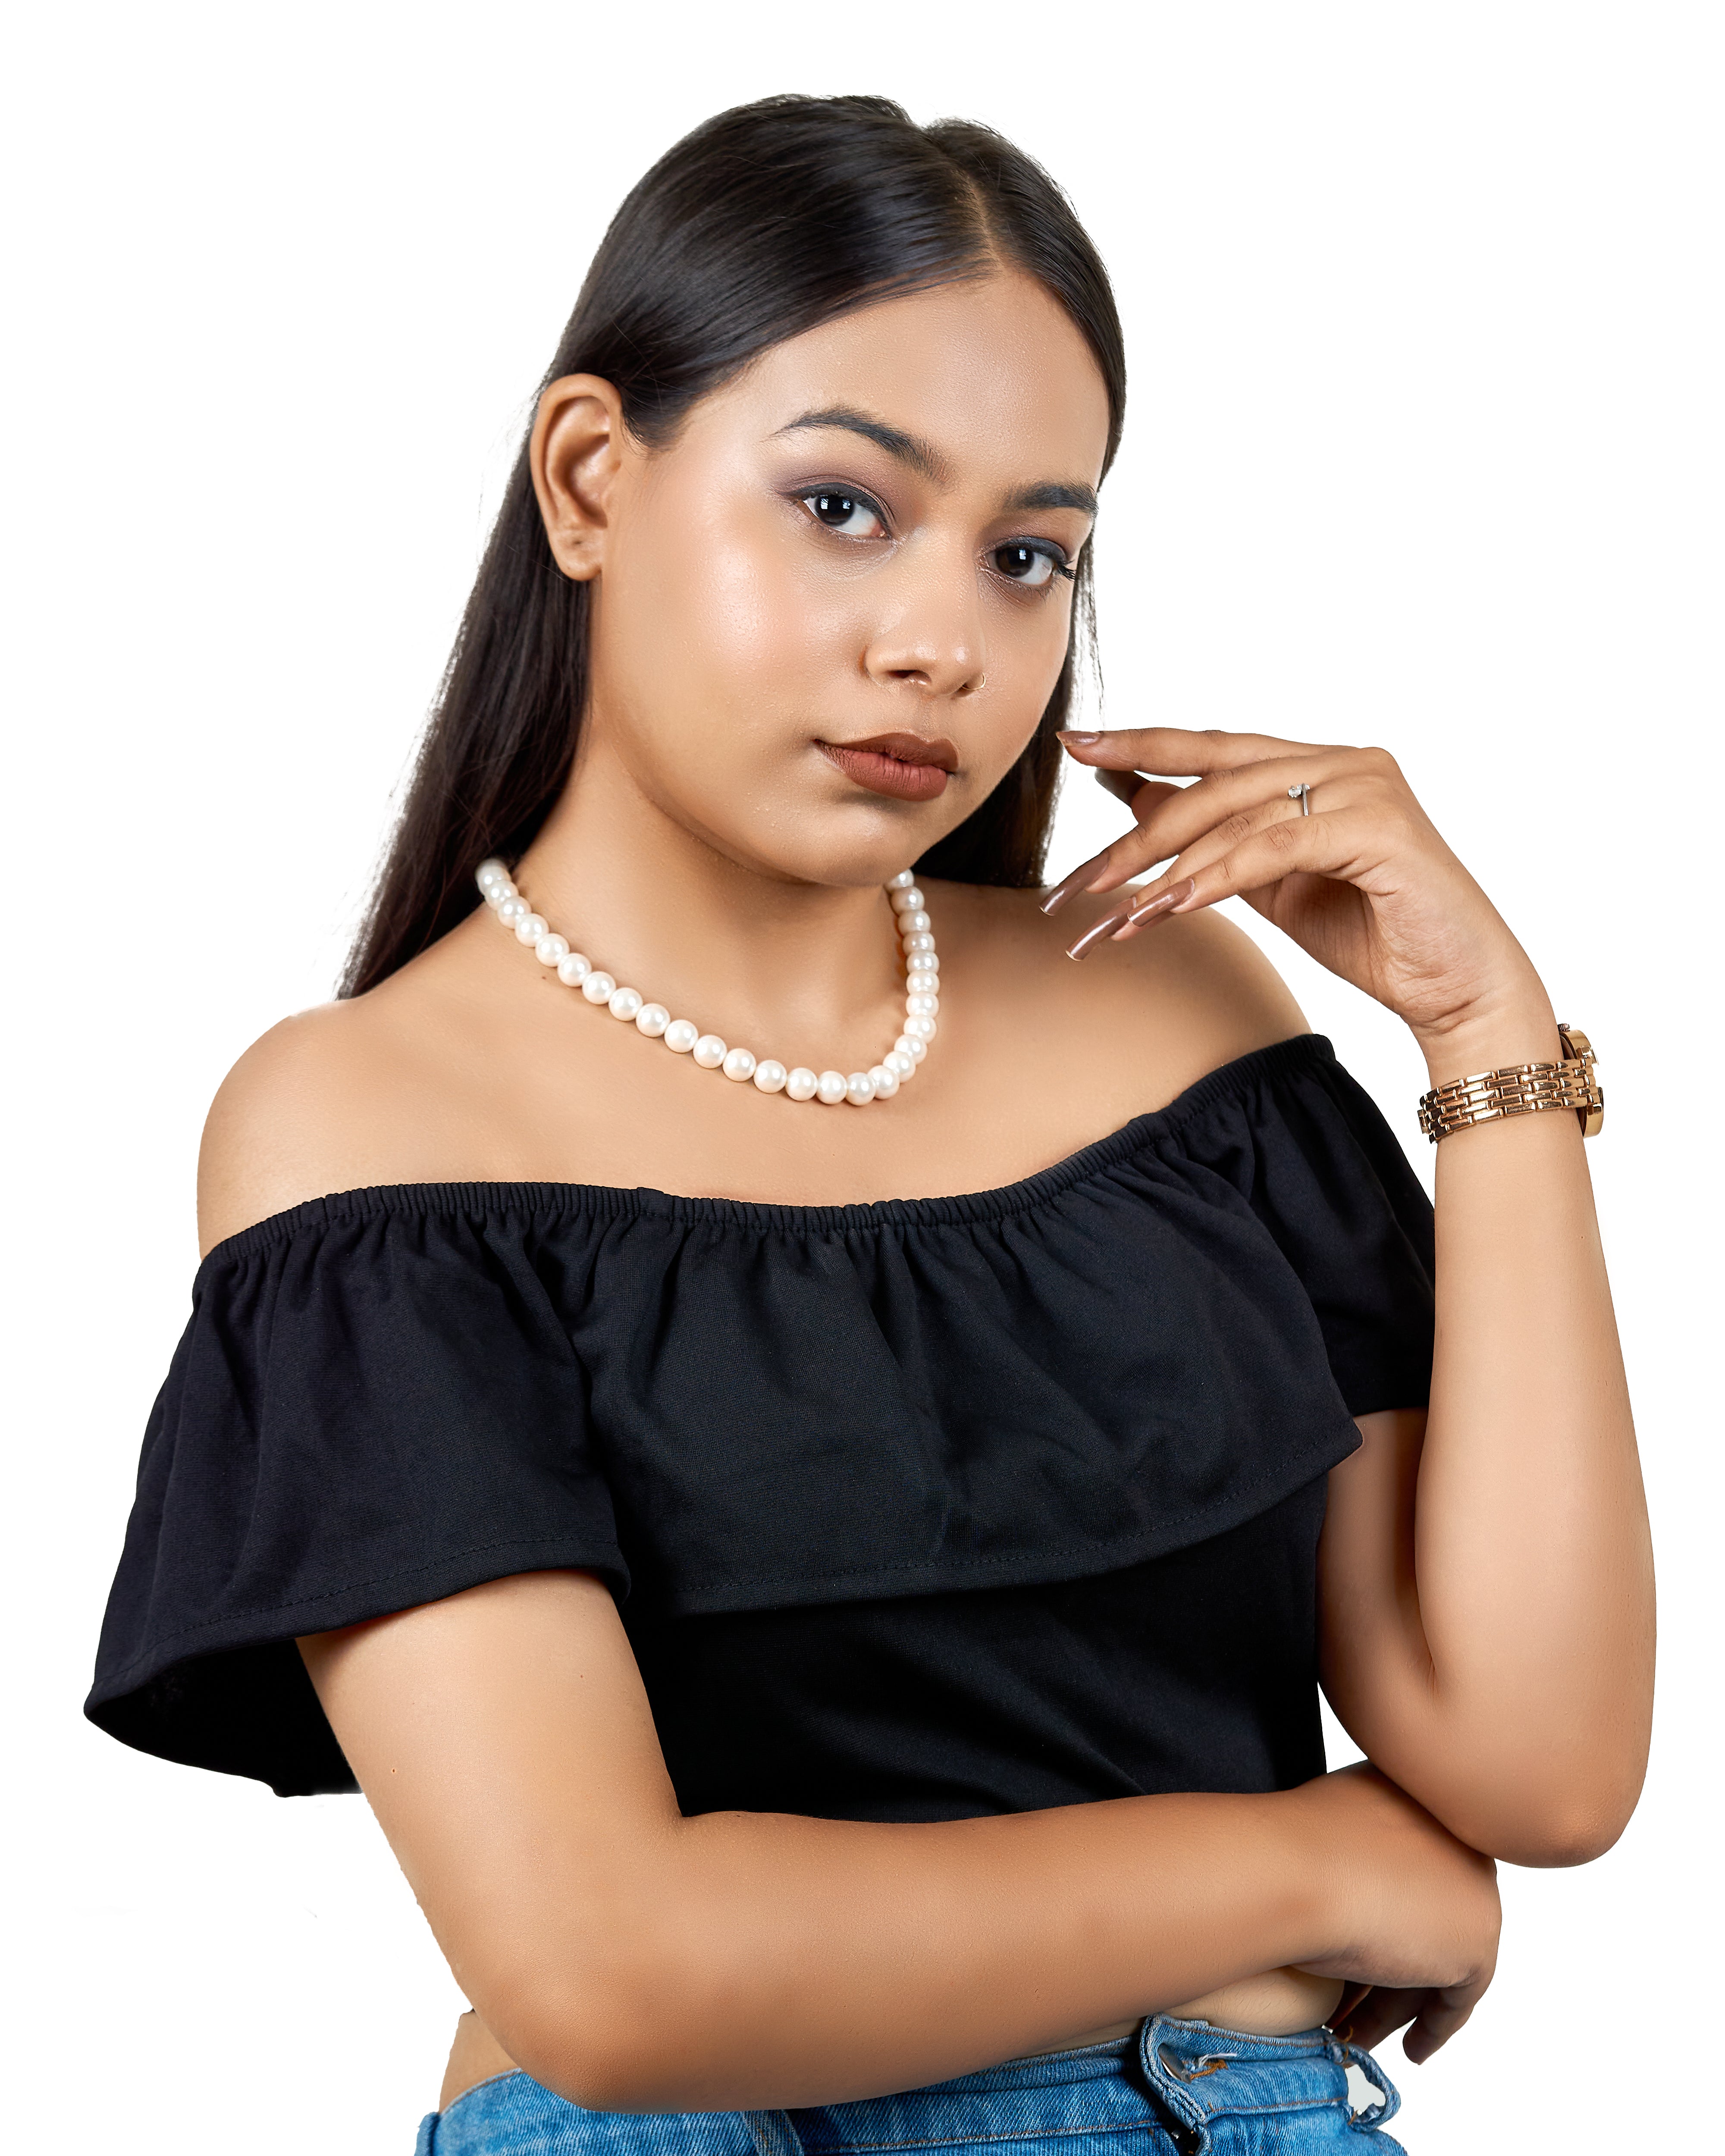 Round Pearl Choker Necklace for Any Outfit